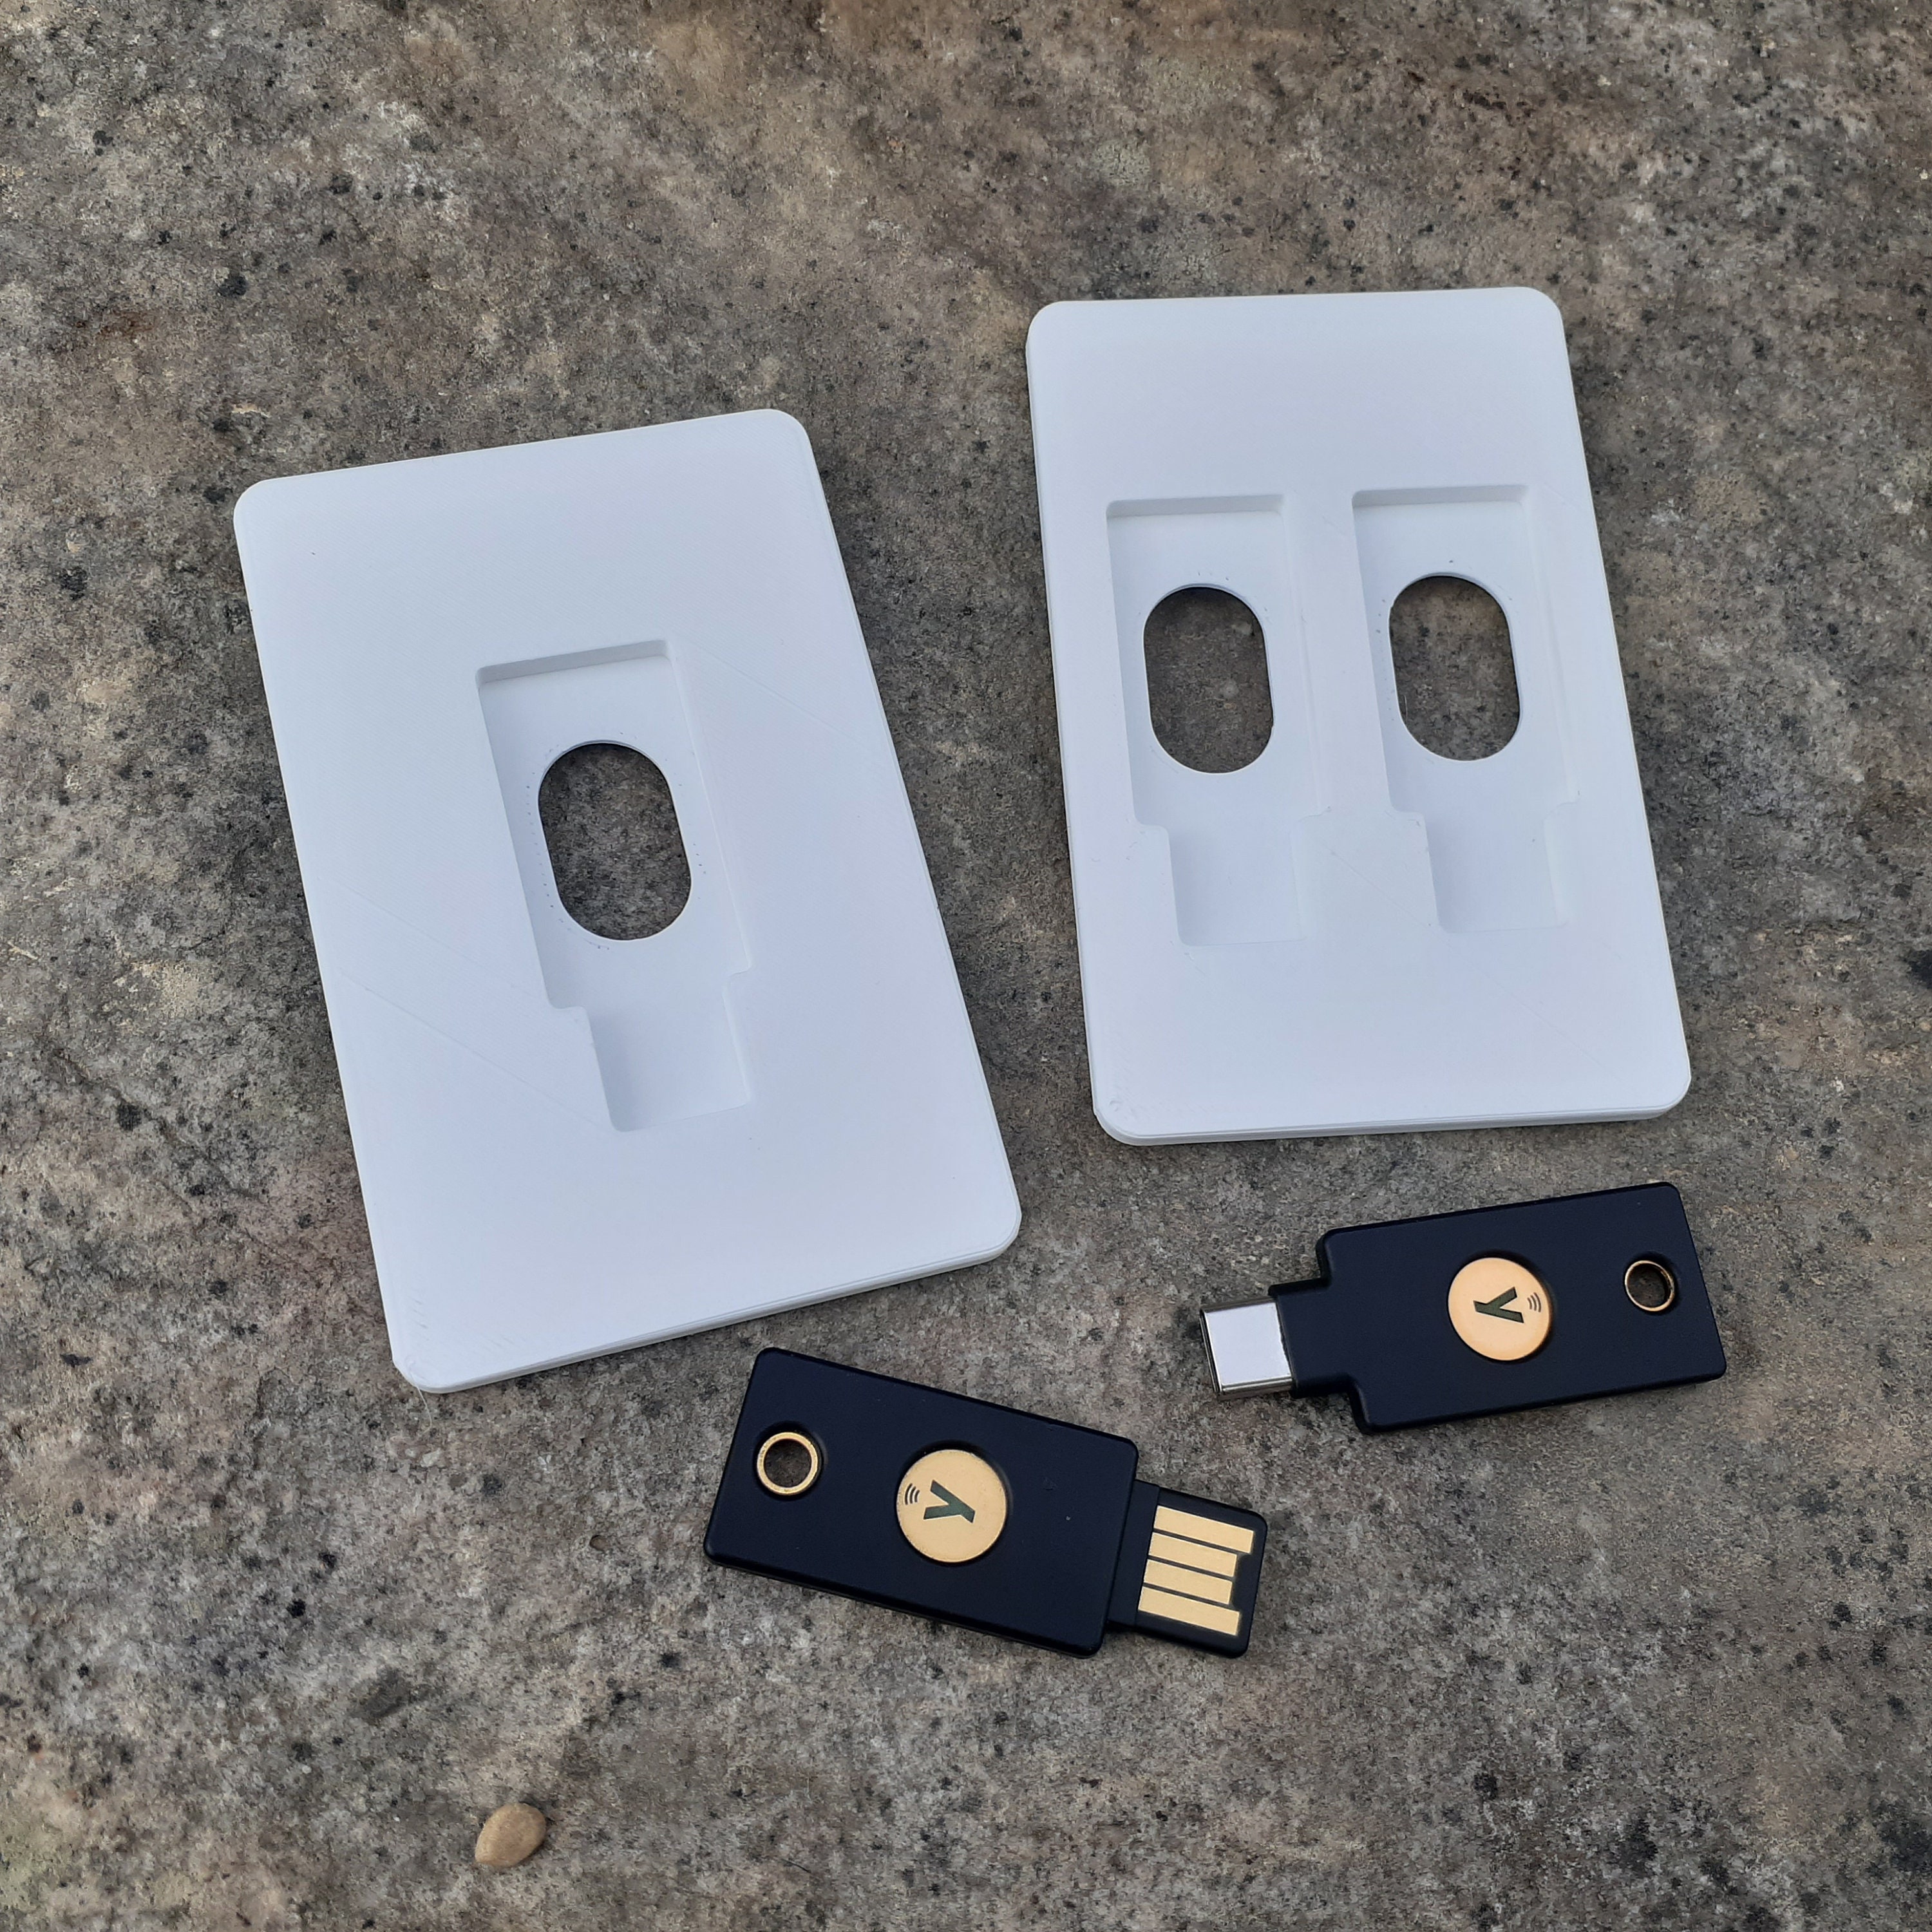 Meet Our Newest Member The YubiKey 5C NFC - Yubico